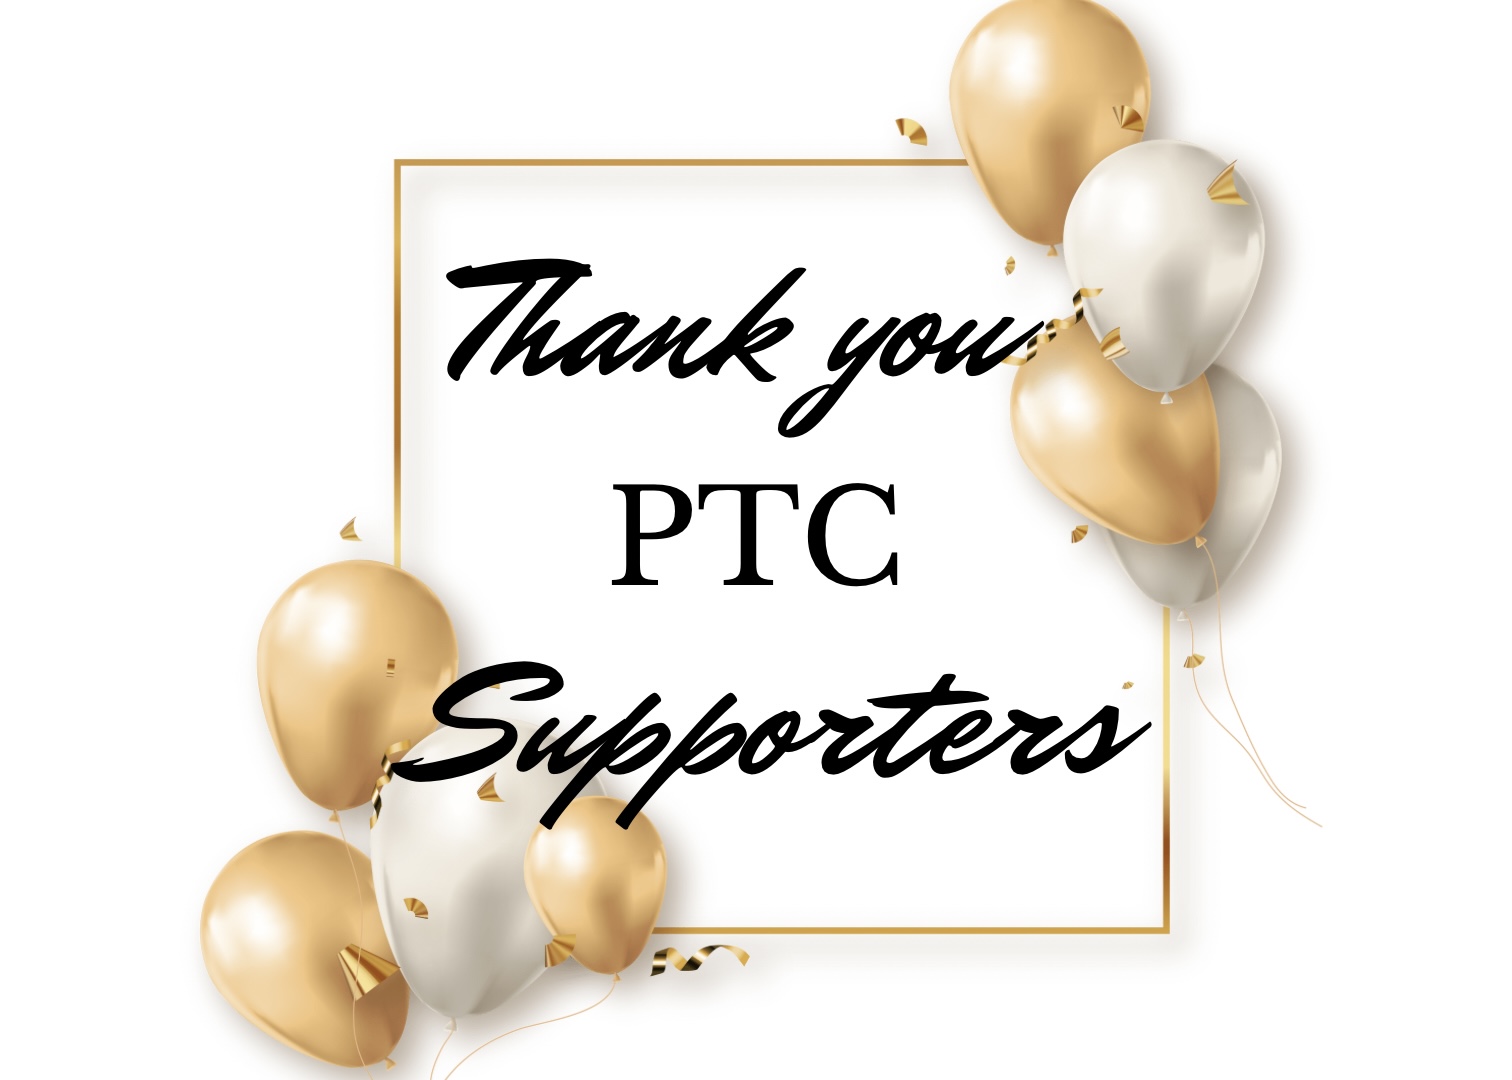 Thank you to all supporters flyer from the PTC